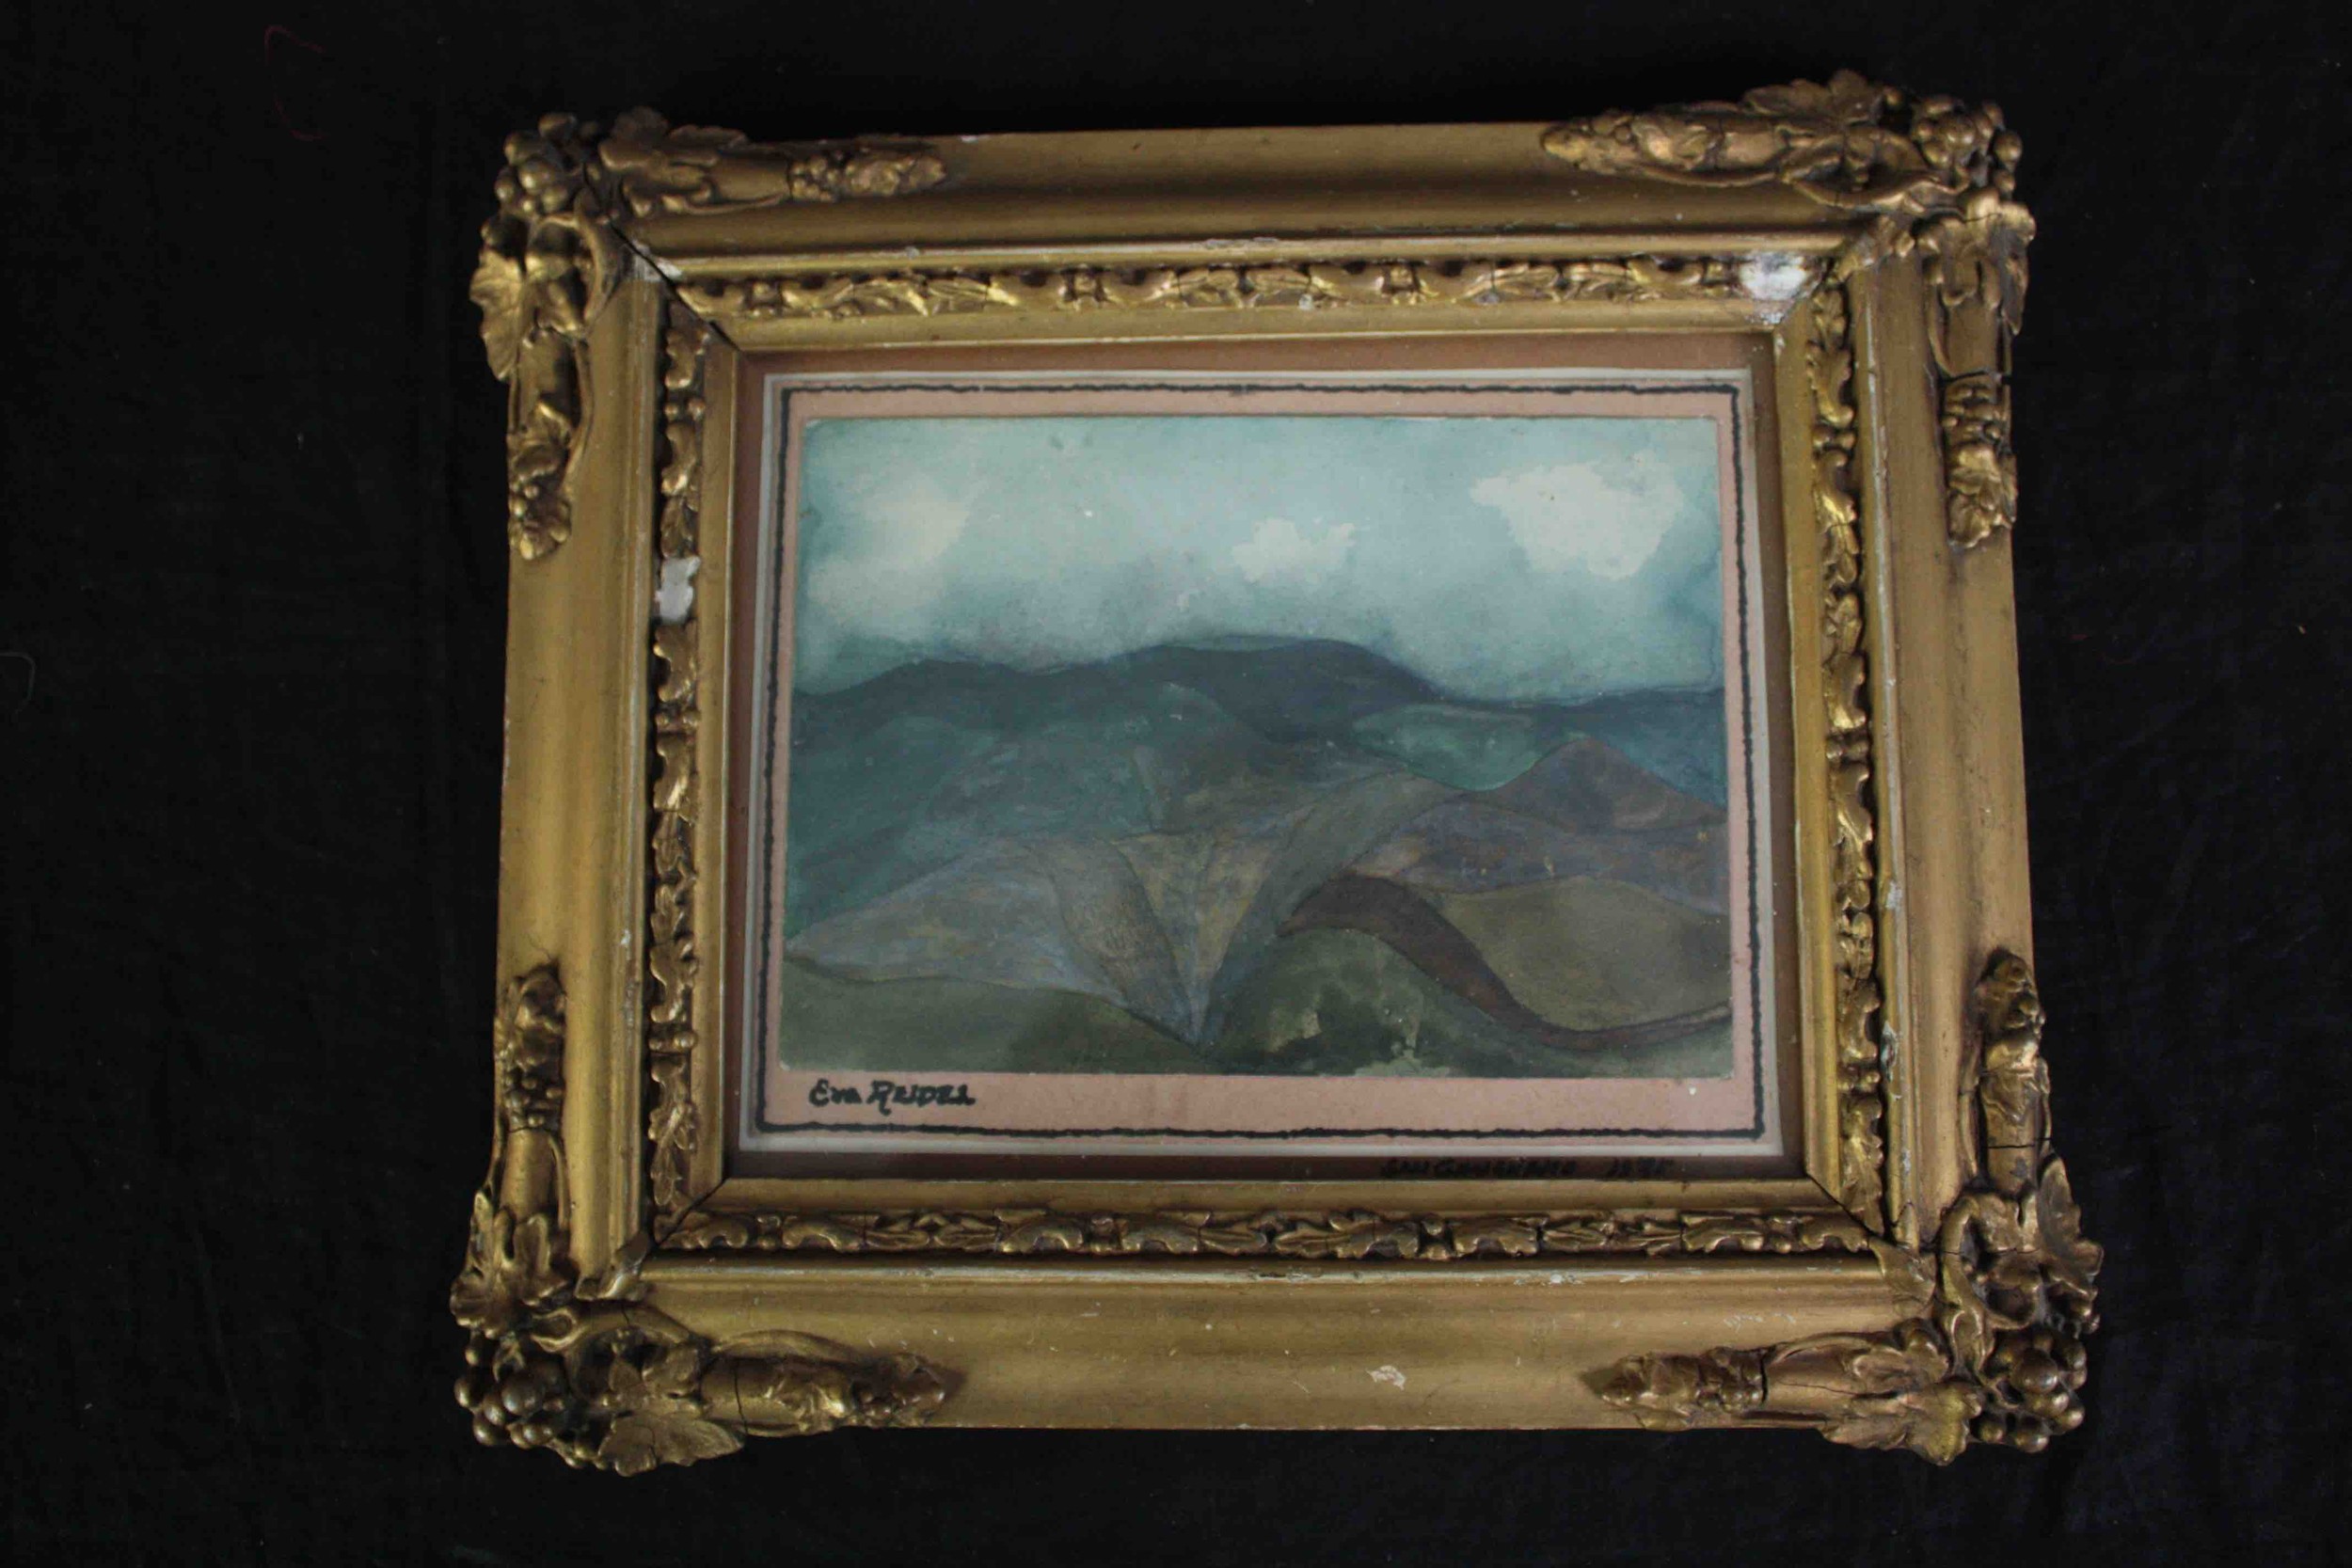 A small watercolour in a decorative gilt frame. Signed 'Eva Rendel' H.22 W.26 cm. - Image 2 of 4